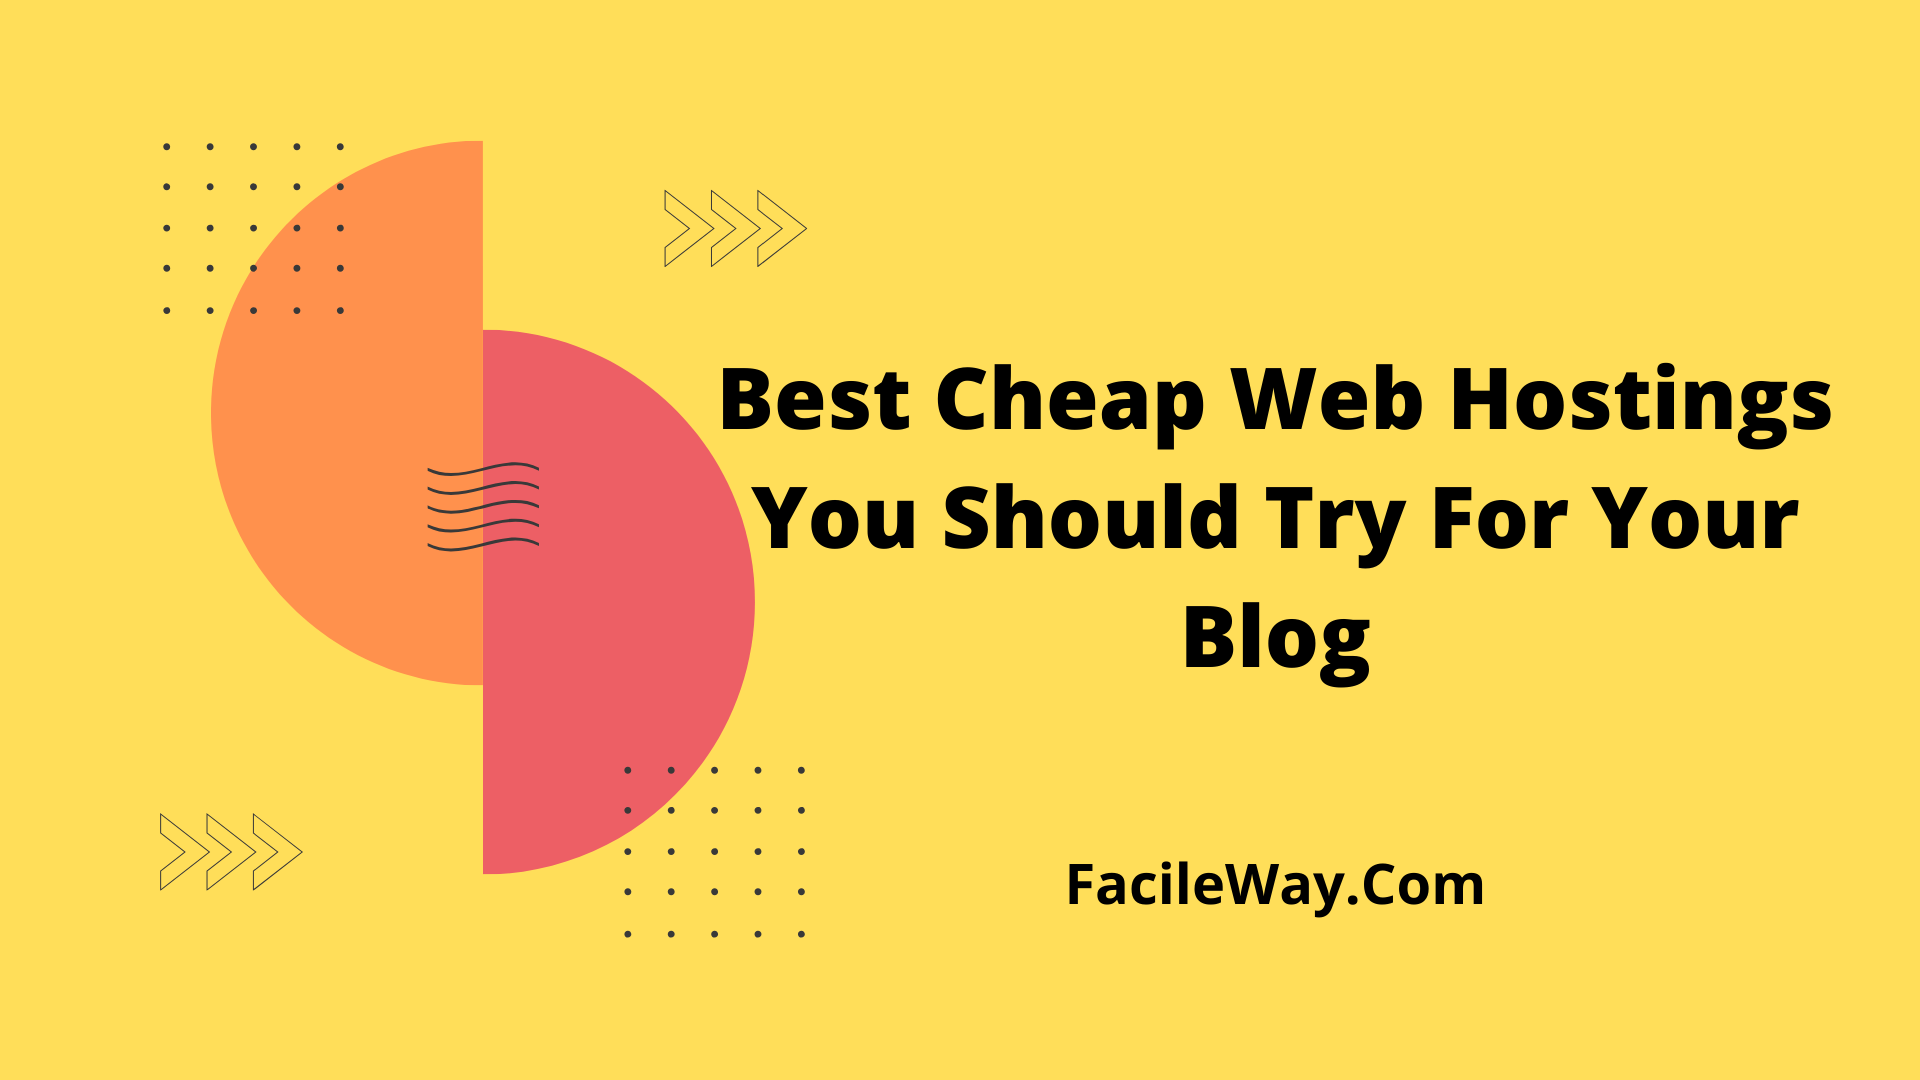 Best Cheap Web Hosting You Should Try in 2020